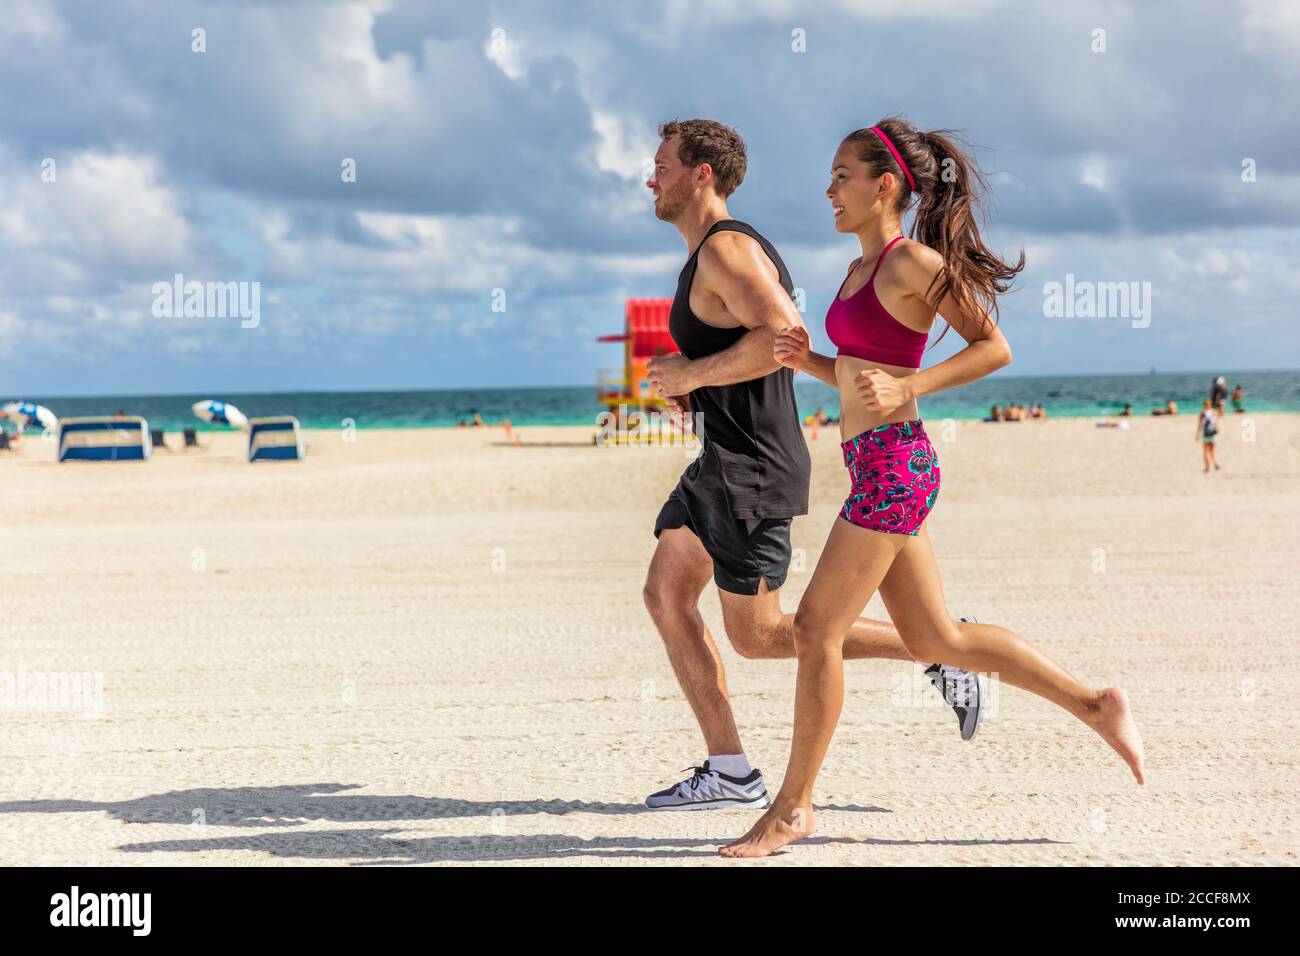 Running people jogging exercising on South Beach, Miami, Florida. Man and  woman training partner runners working out together. Lifestyle active  people Stock Photo - Alamy